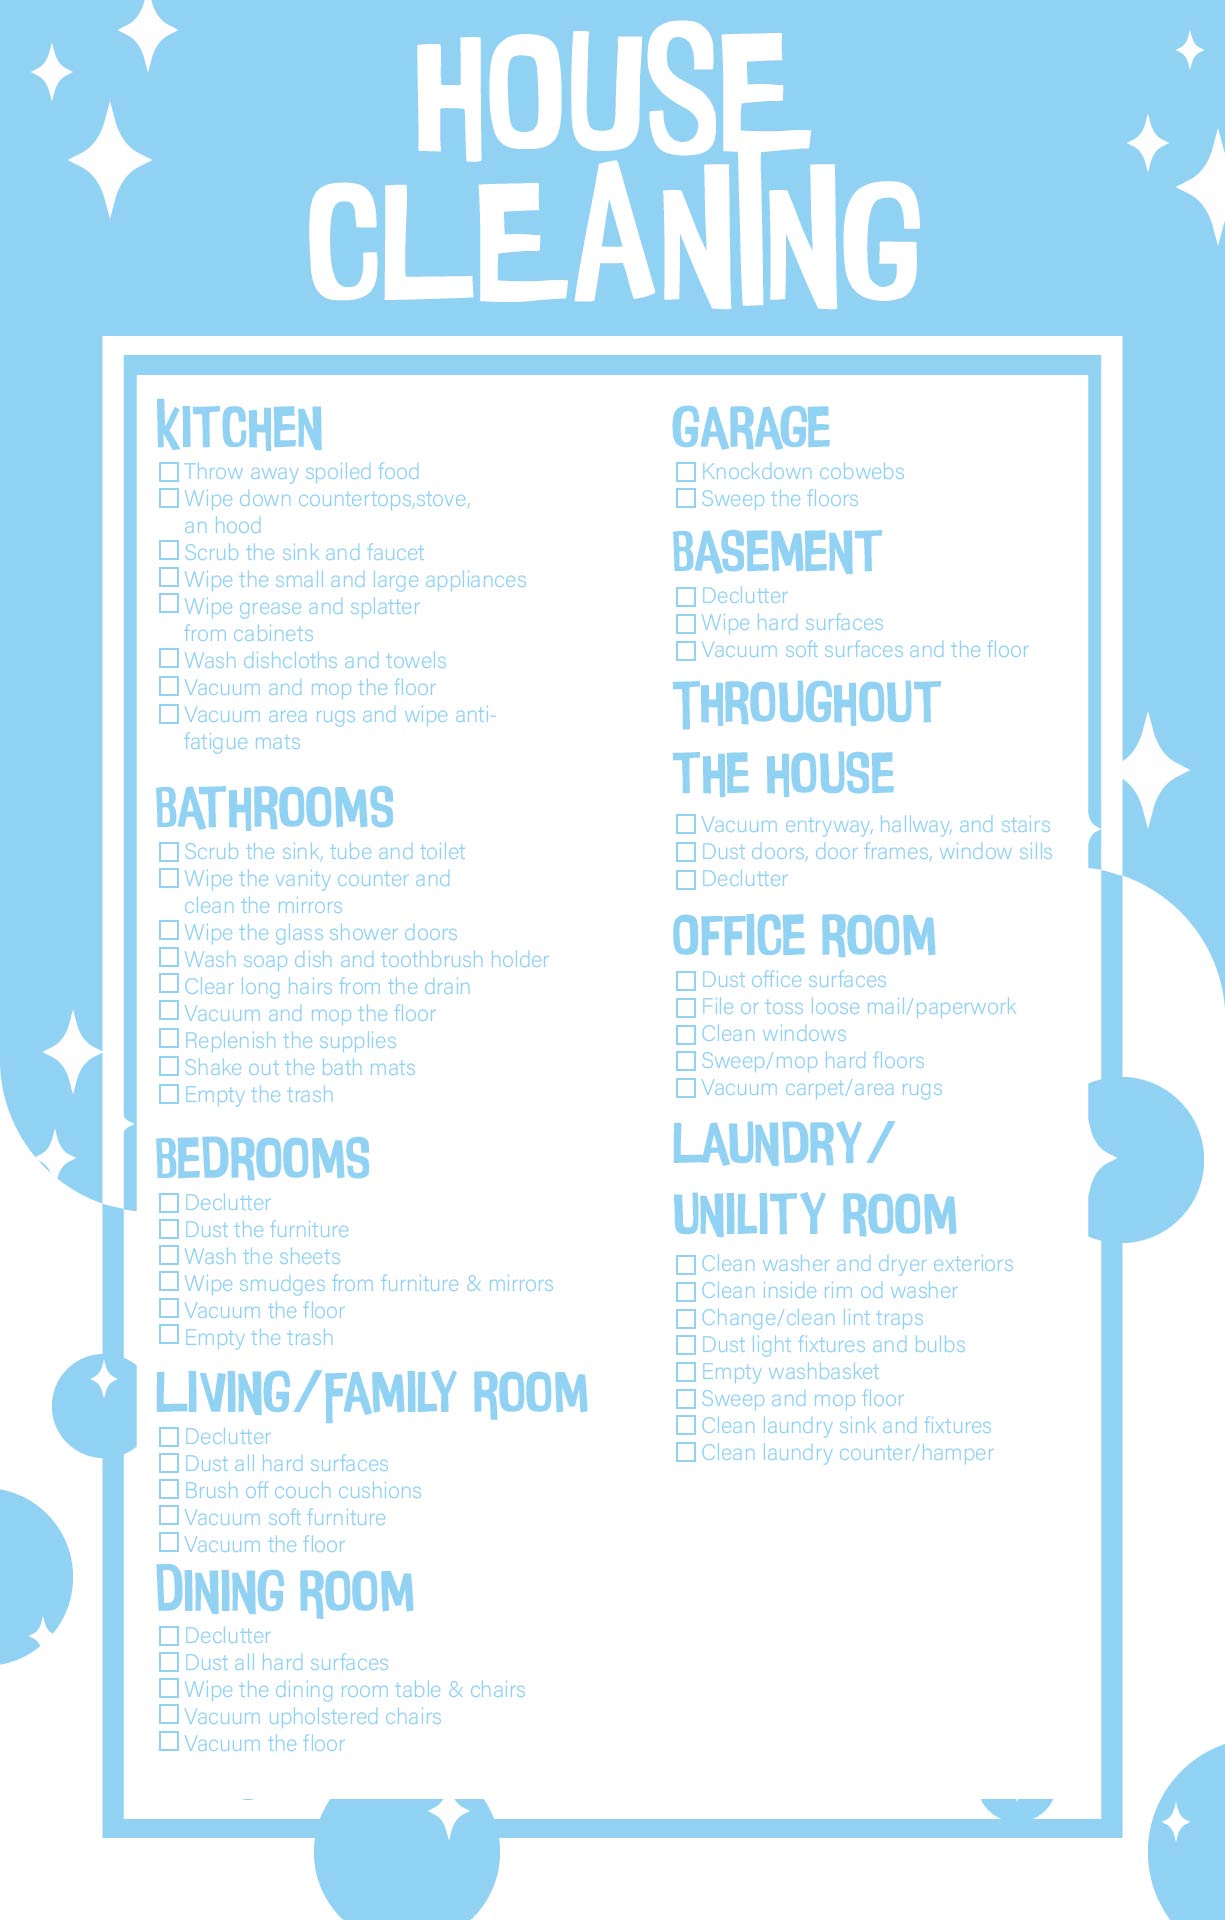 Residential House Cleaning Checklist 405169 